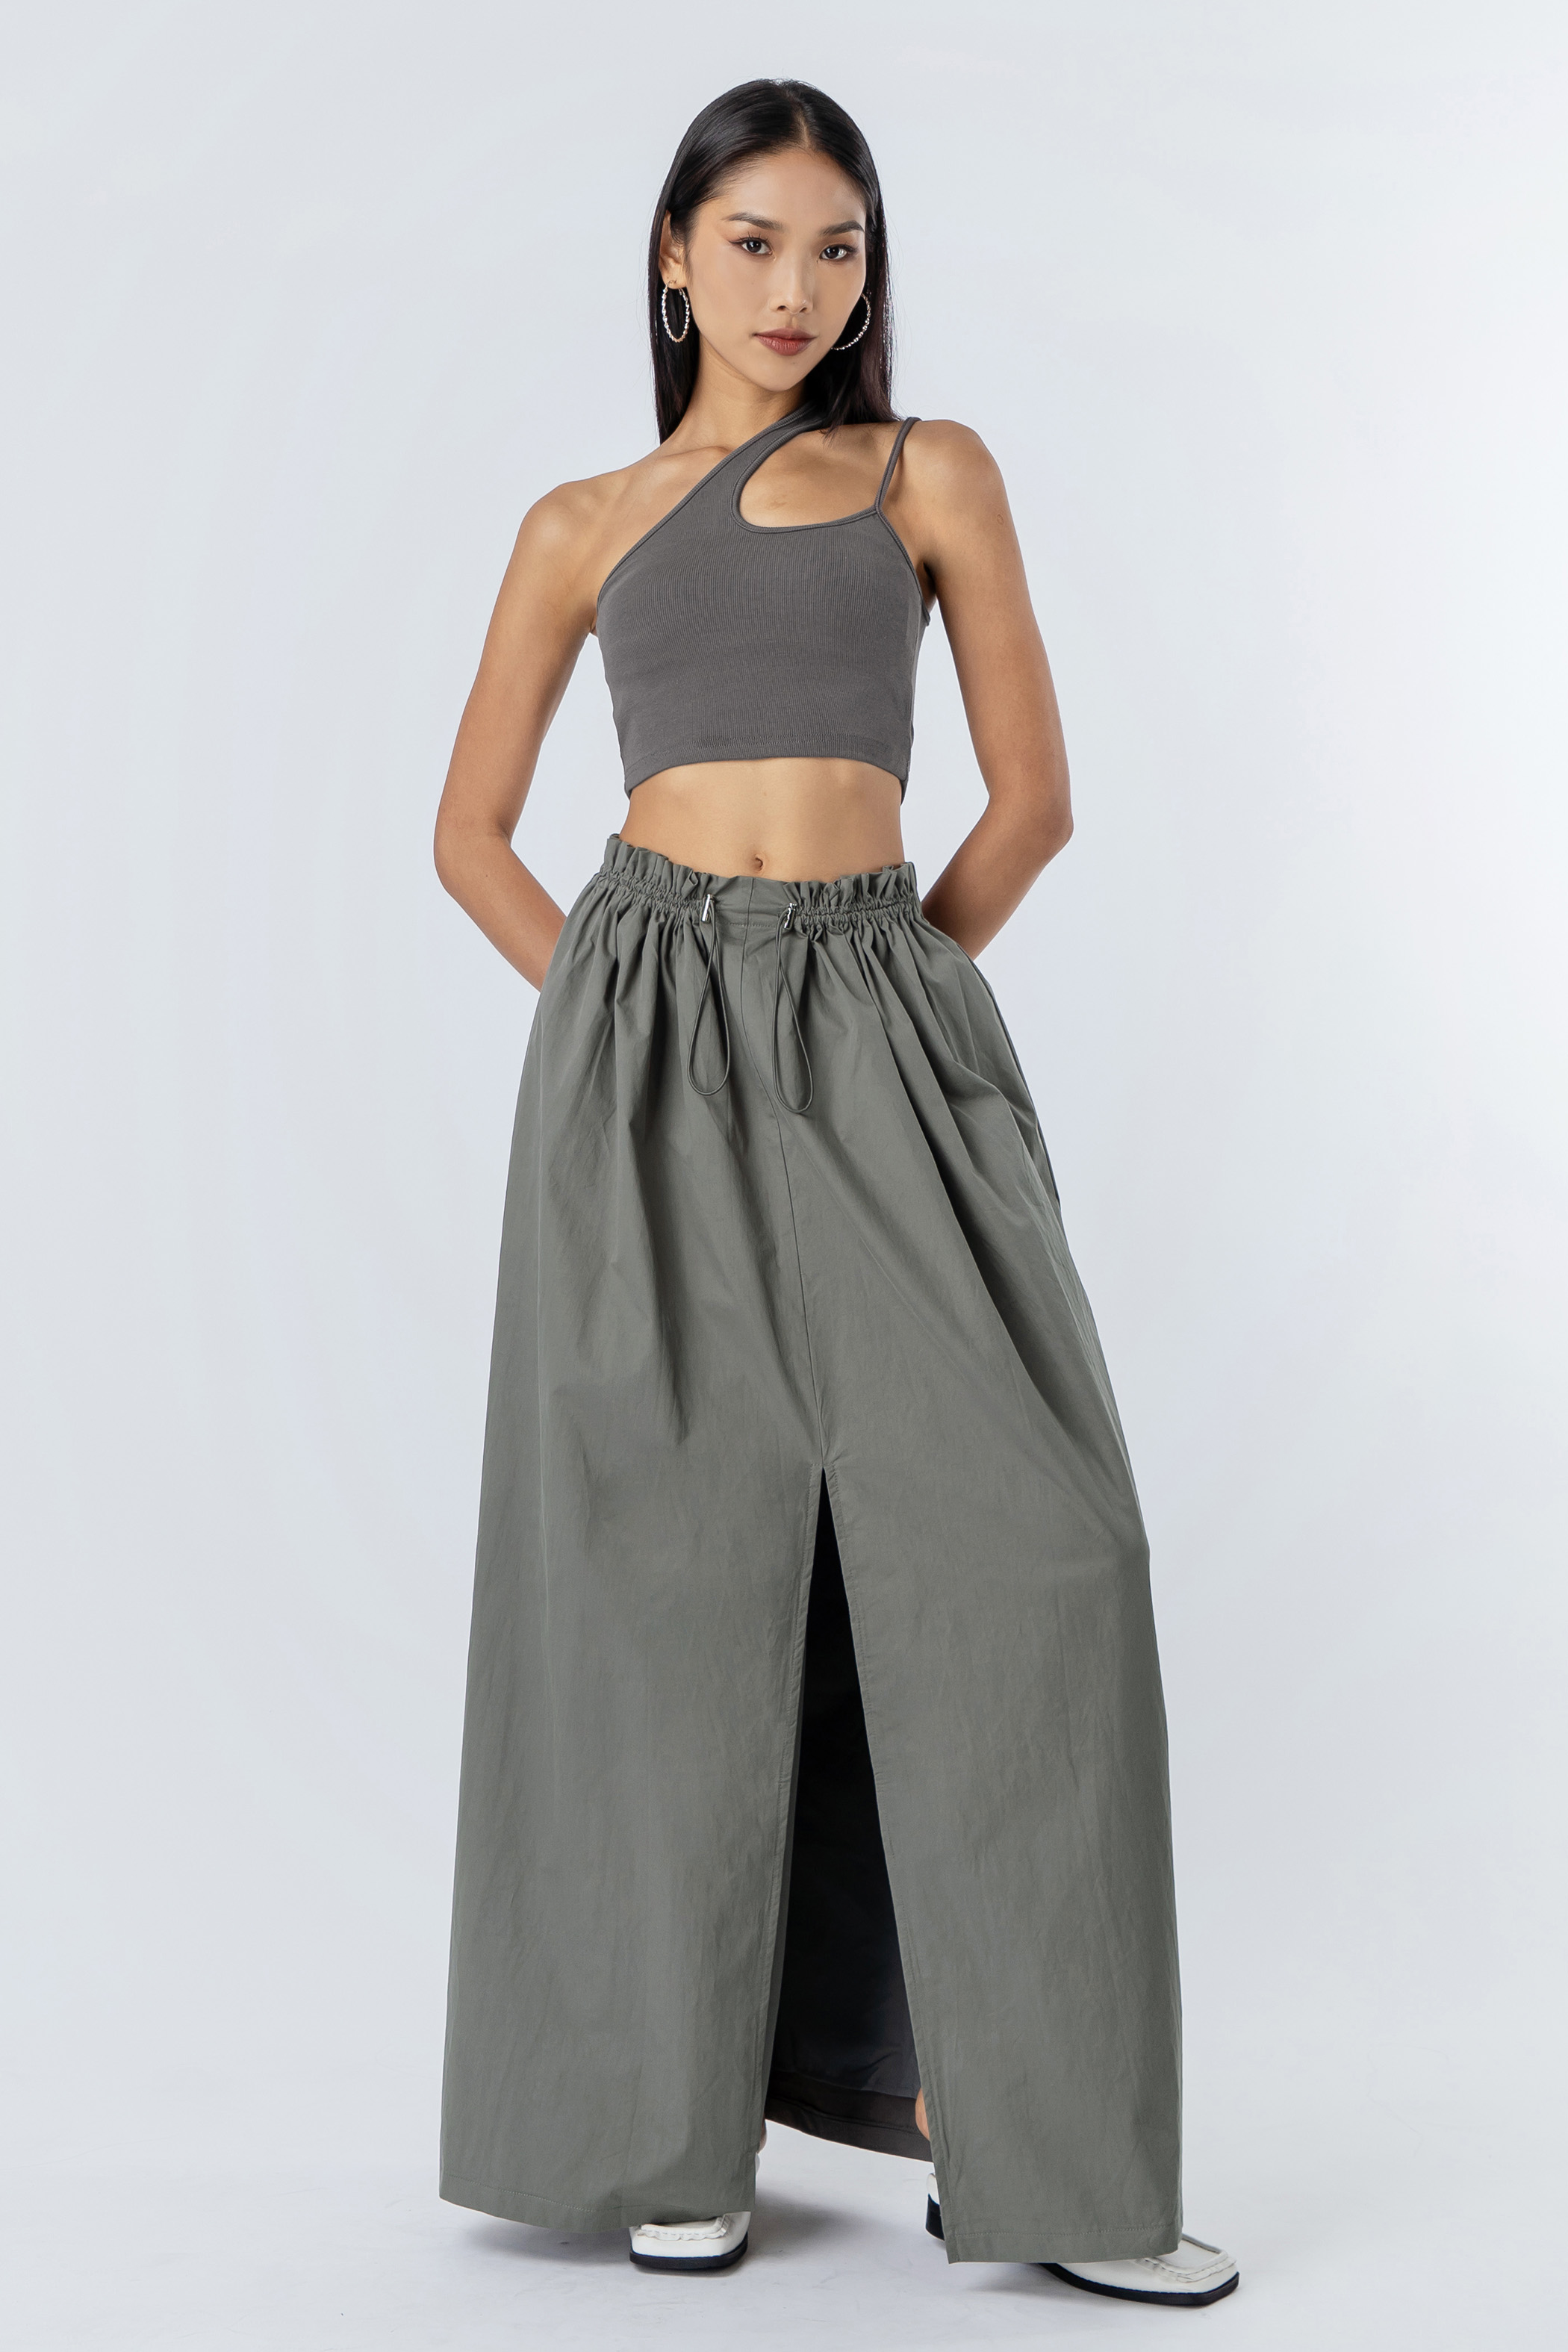 Parachute Skirt in Light Grey | Young Hungry Free